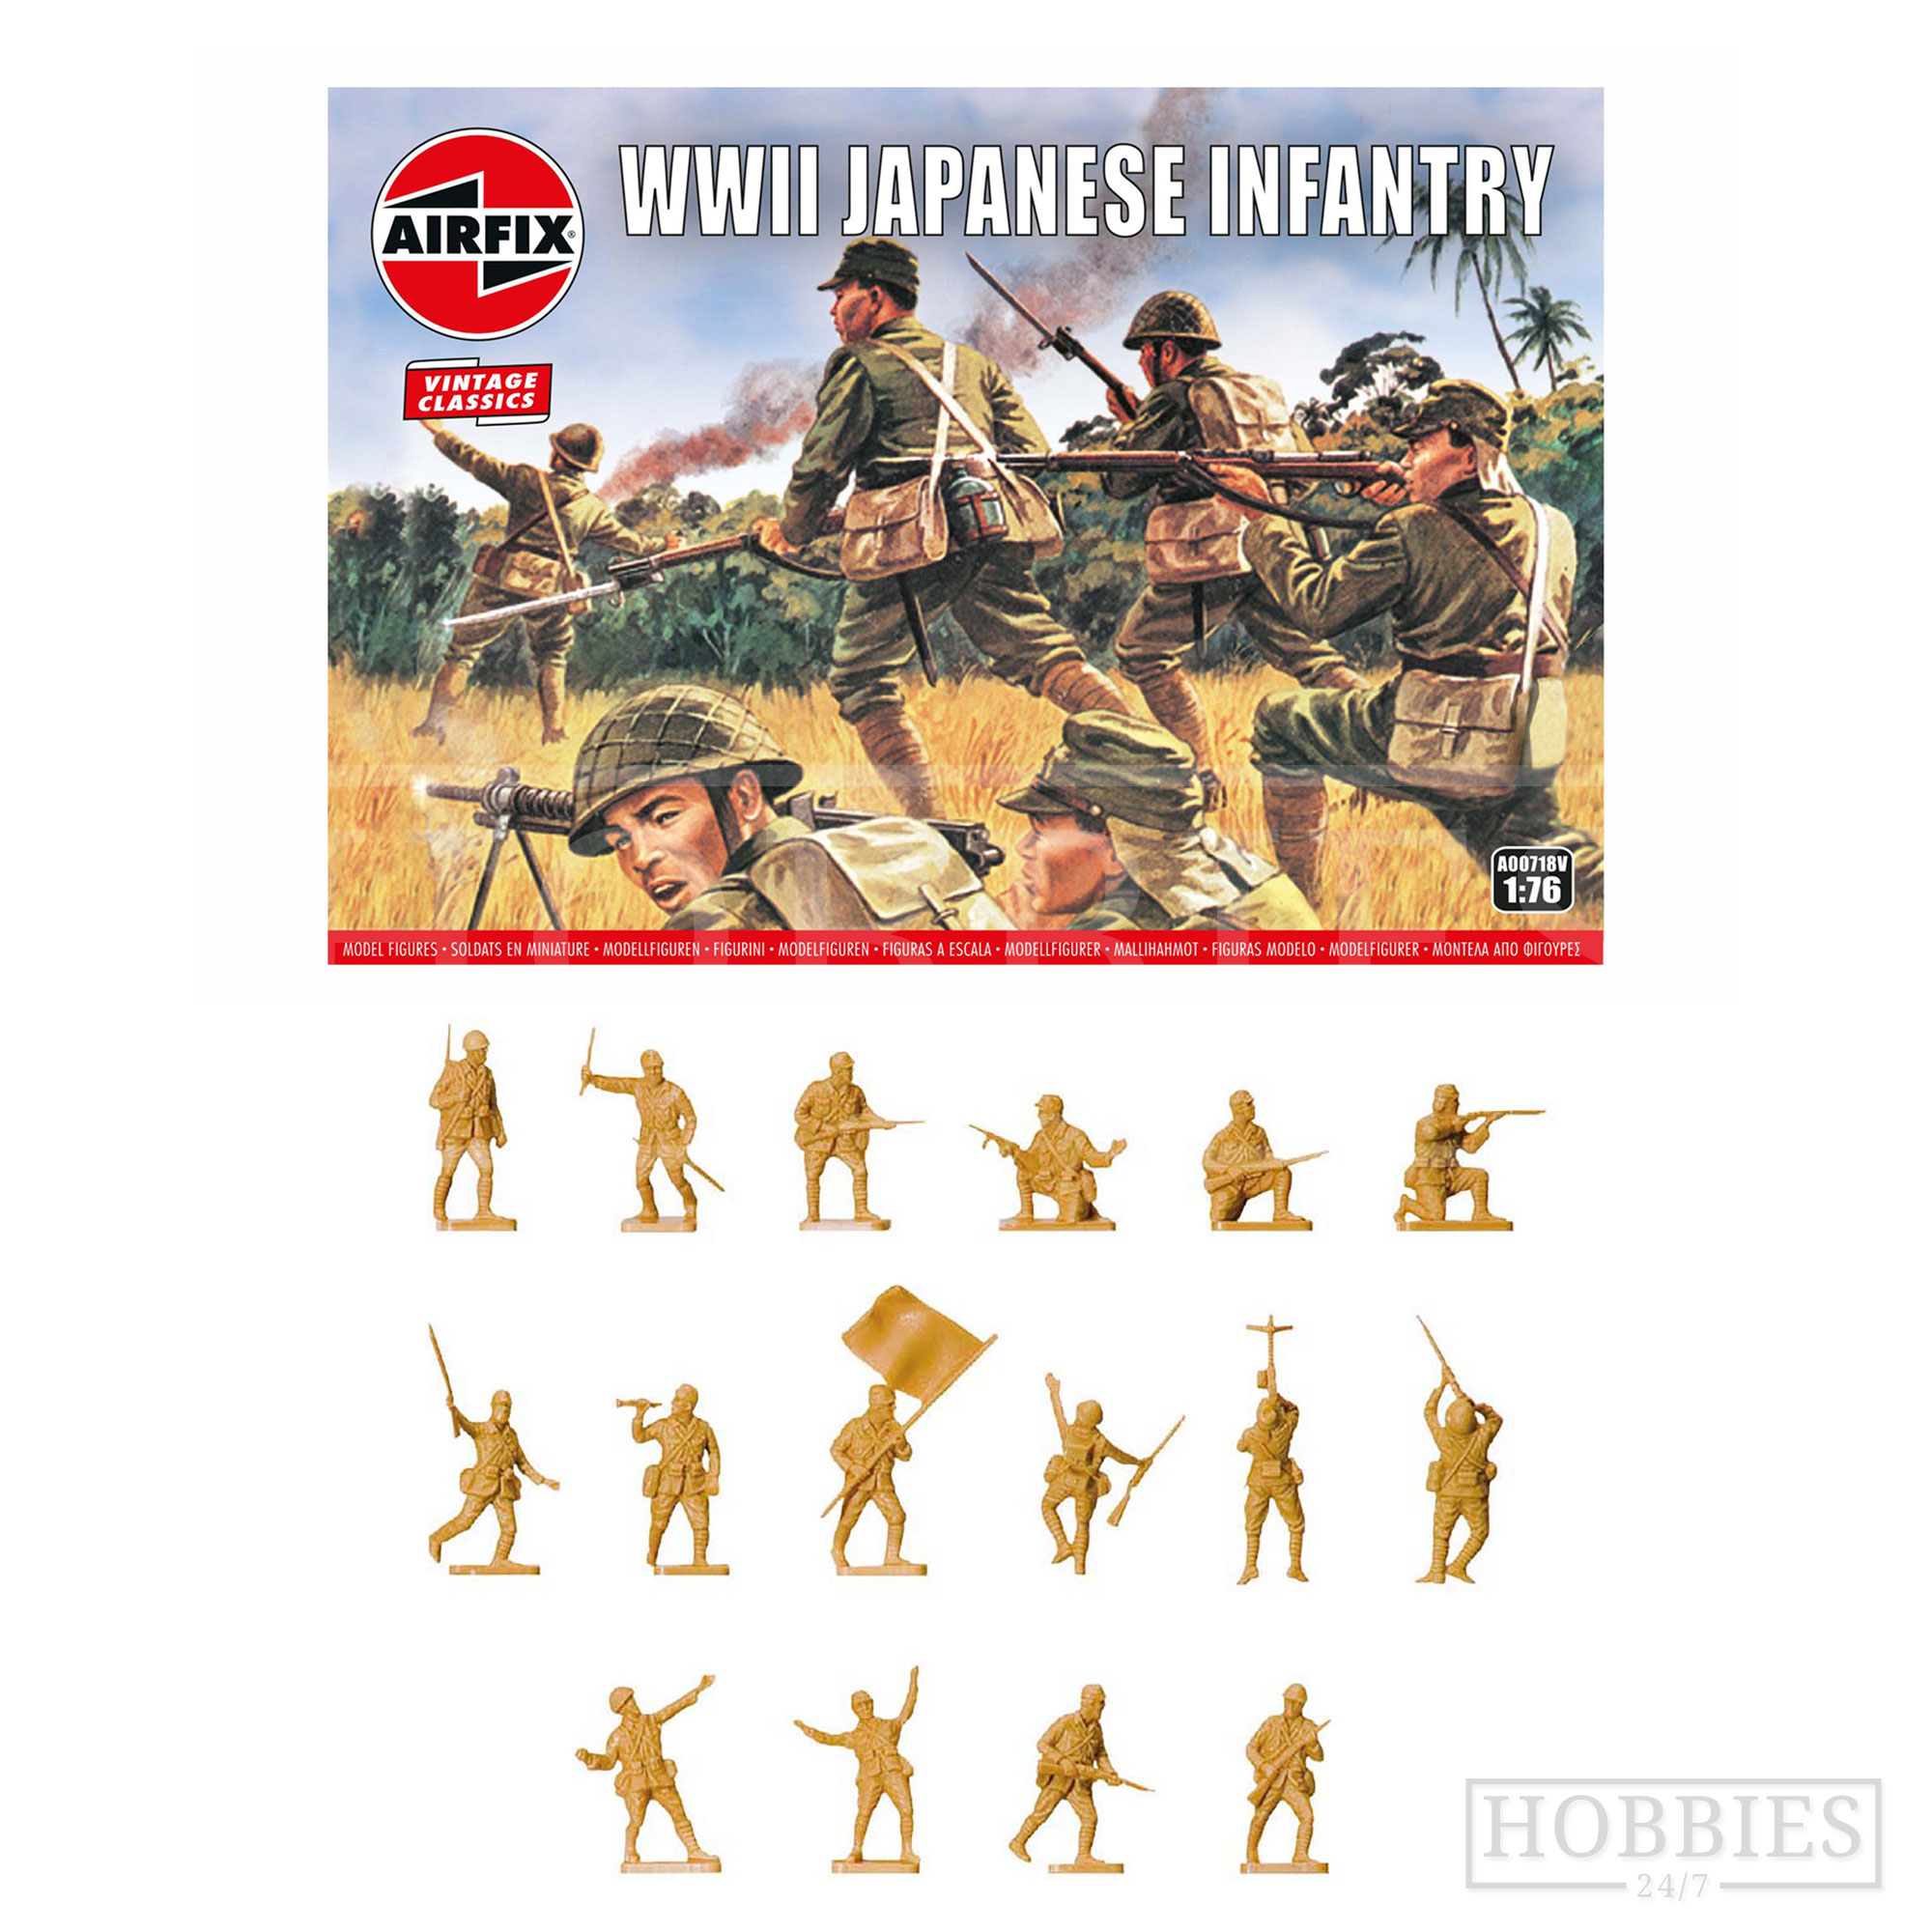 Airfix WWII Japanese Infantry 1/76 Scale - Hobbies247 Online Model Shop